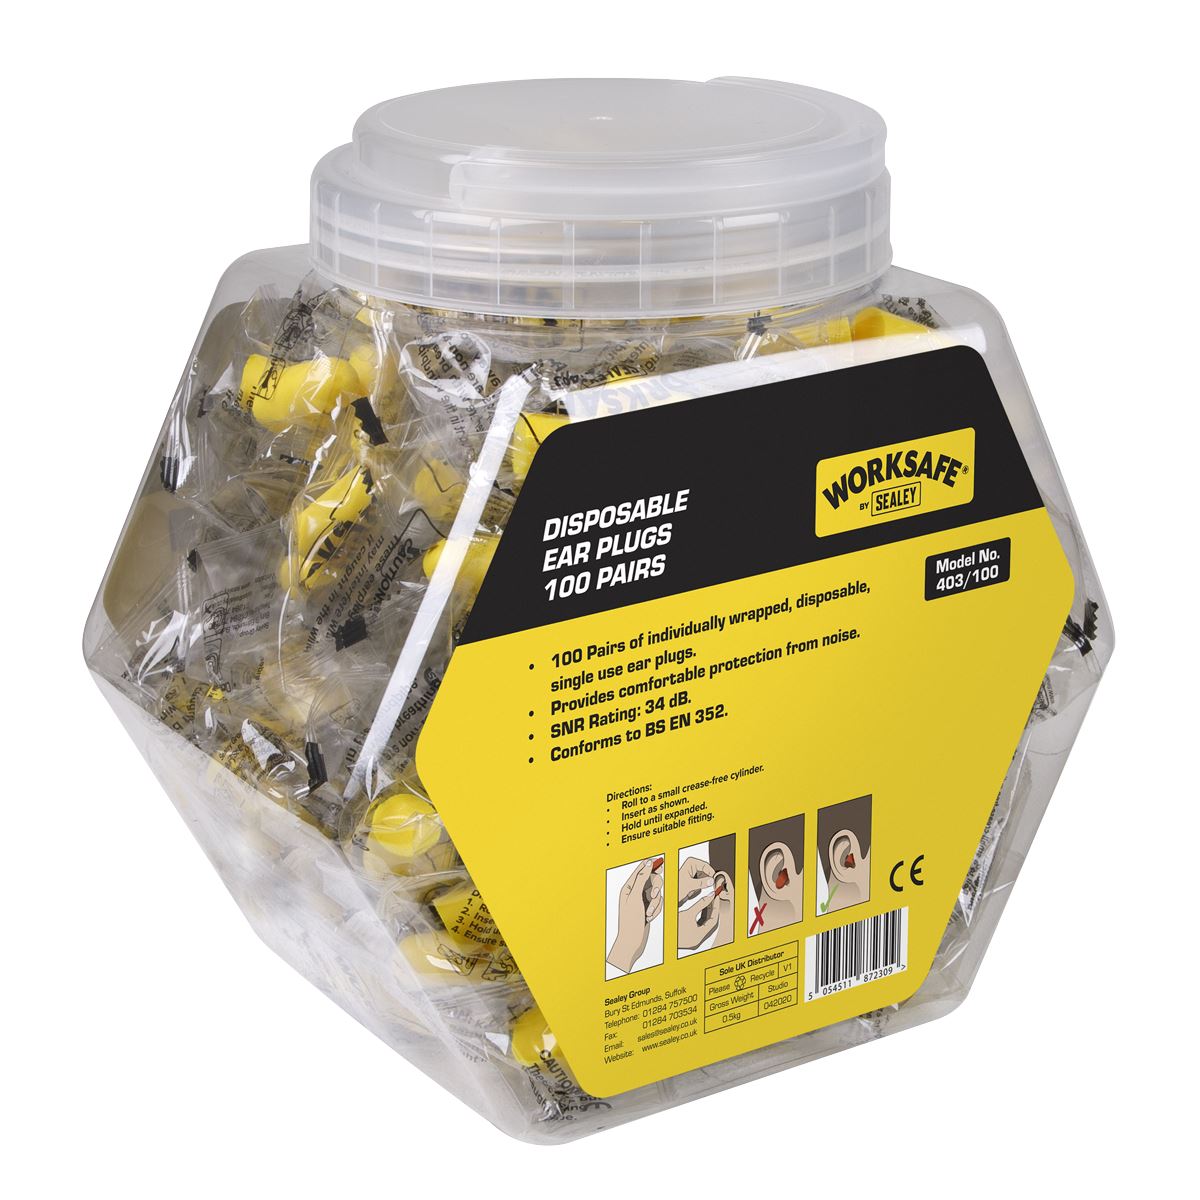 Worksafe by Sealey Ear Plugs Disposable - 100 Pairs